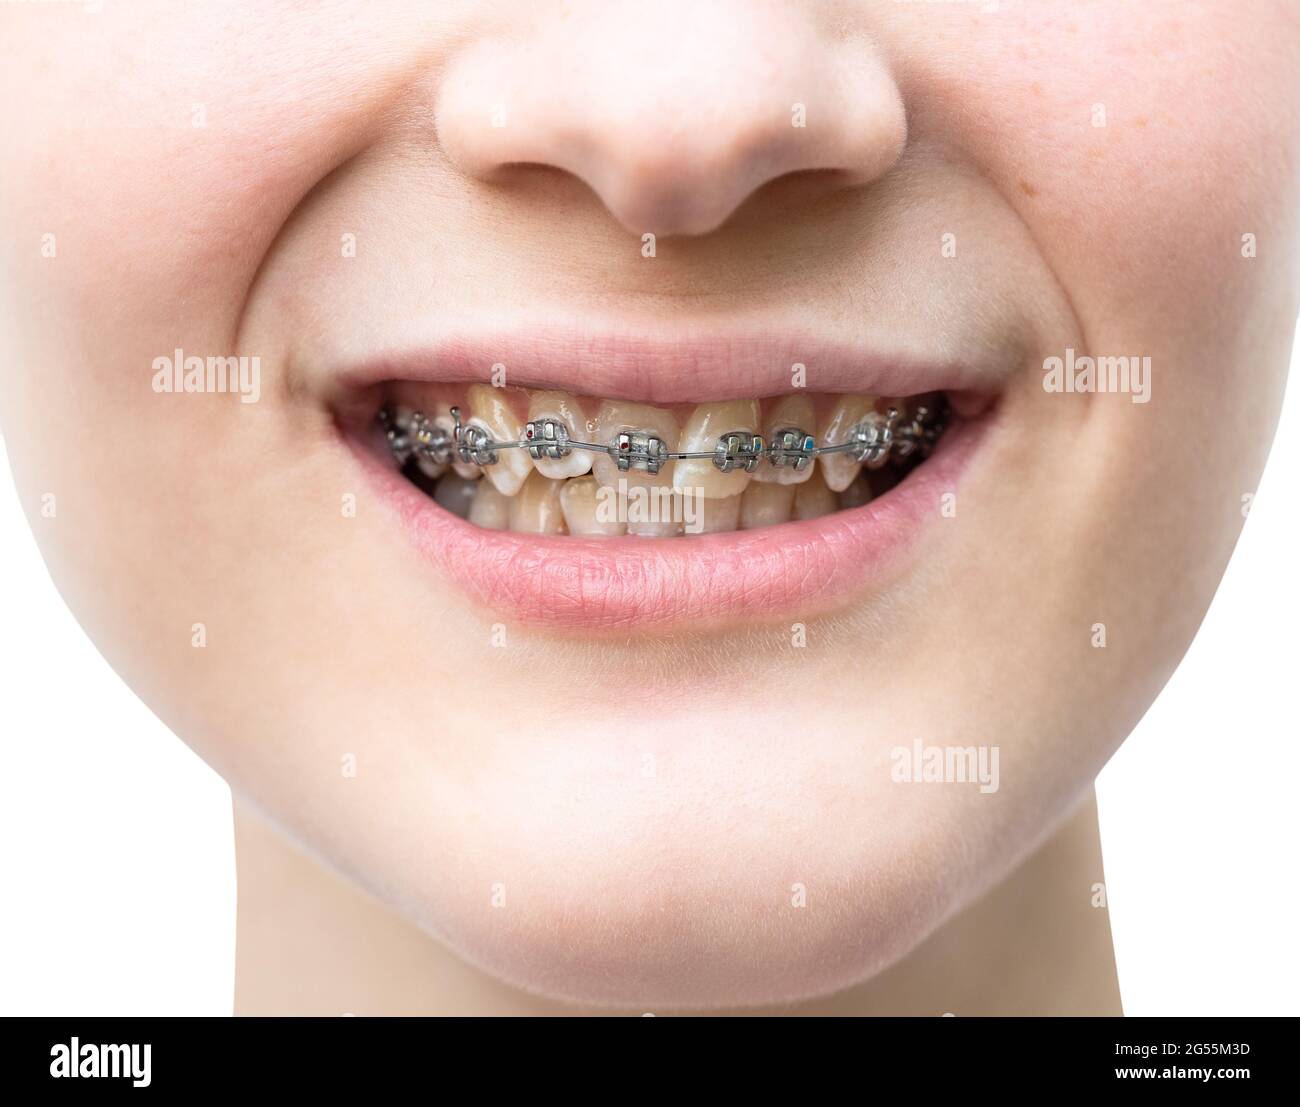 front view of metal dental braces on teeth of upper jaw of girl closeup cutout on white background Stock Photo